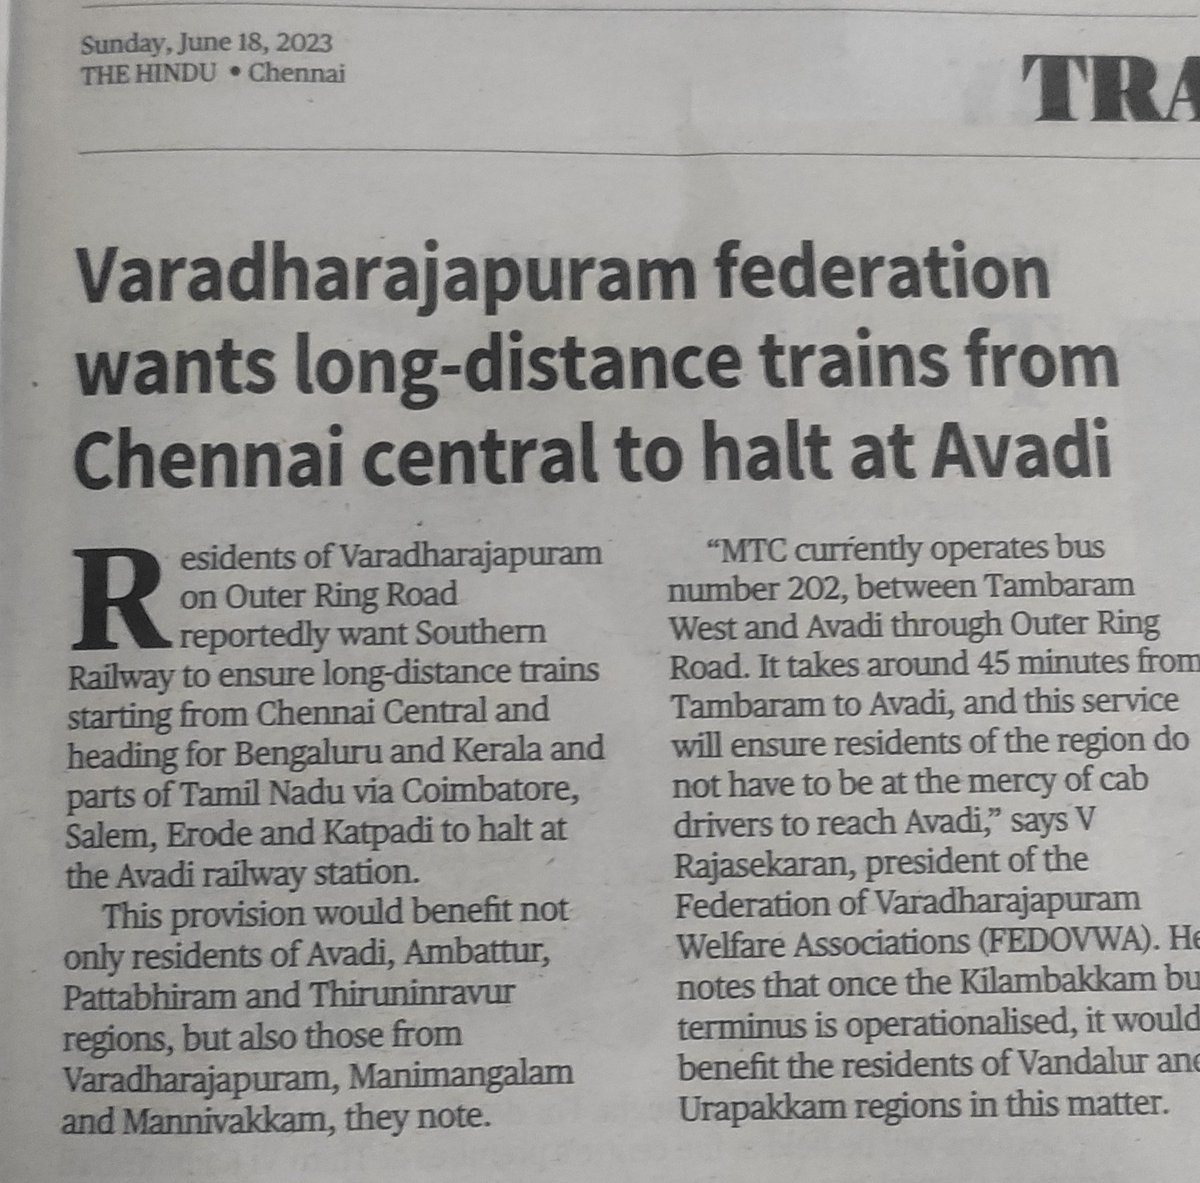 @AshwiniVaishnaw @DrmChennai @GMSRailway @PMOIndia @CMOTamilnadu Article from The Hindu about Express train stop at Avadi railway station it's benefit residents from many locality but reduce traffic in the city when people reach central via taxi cabs